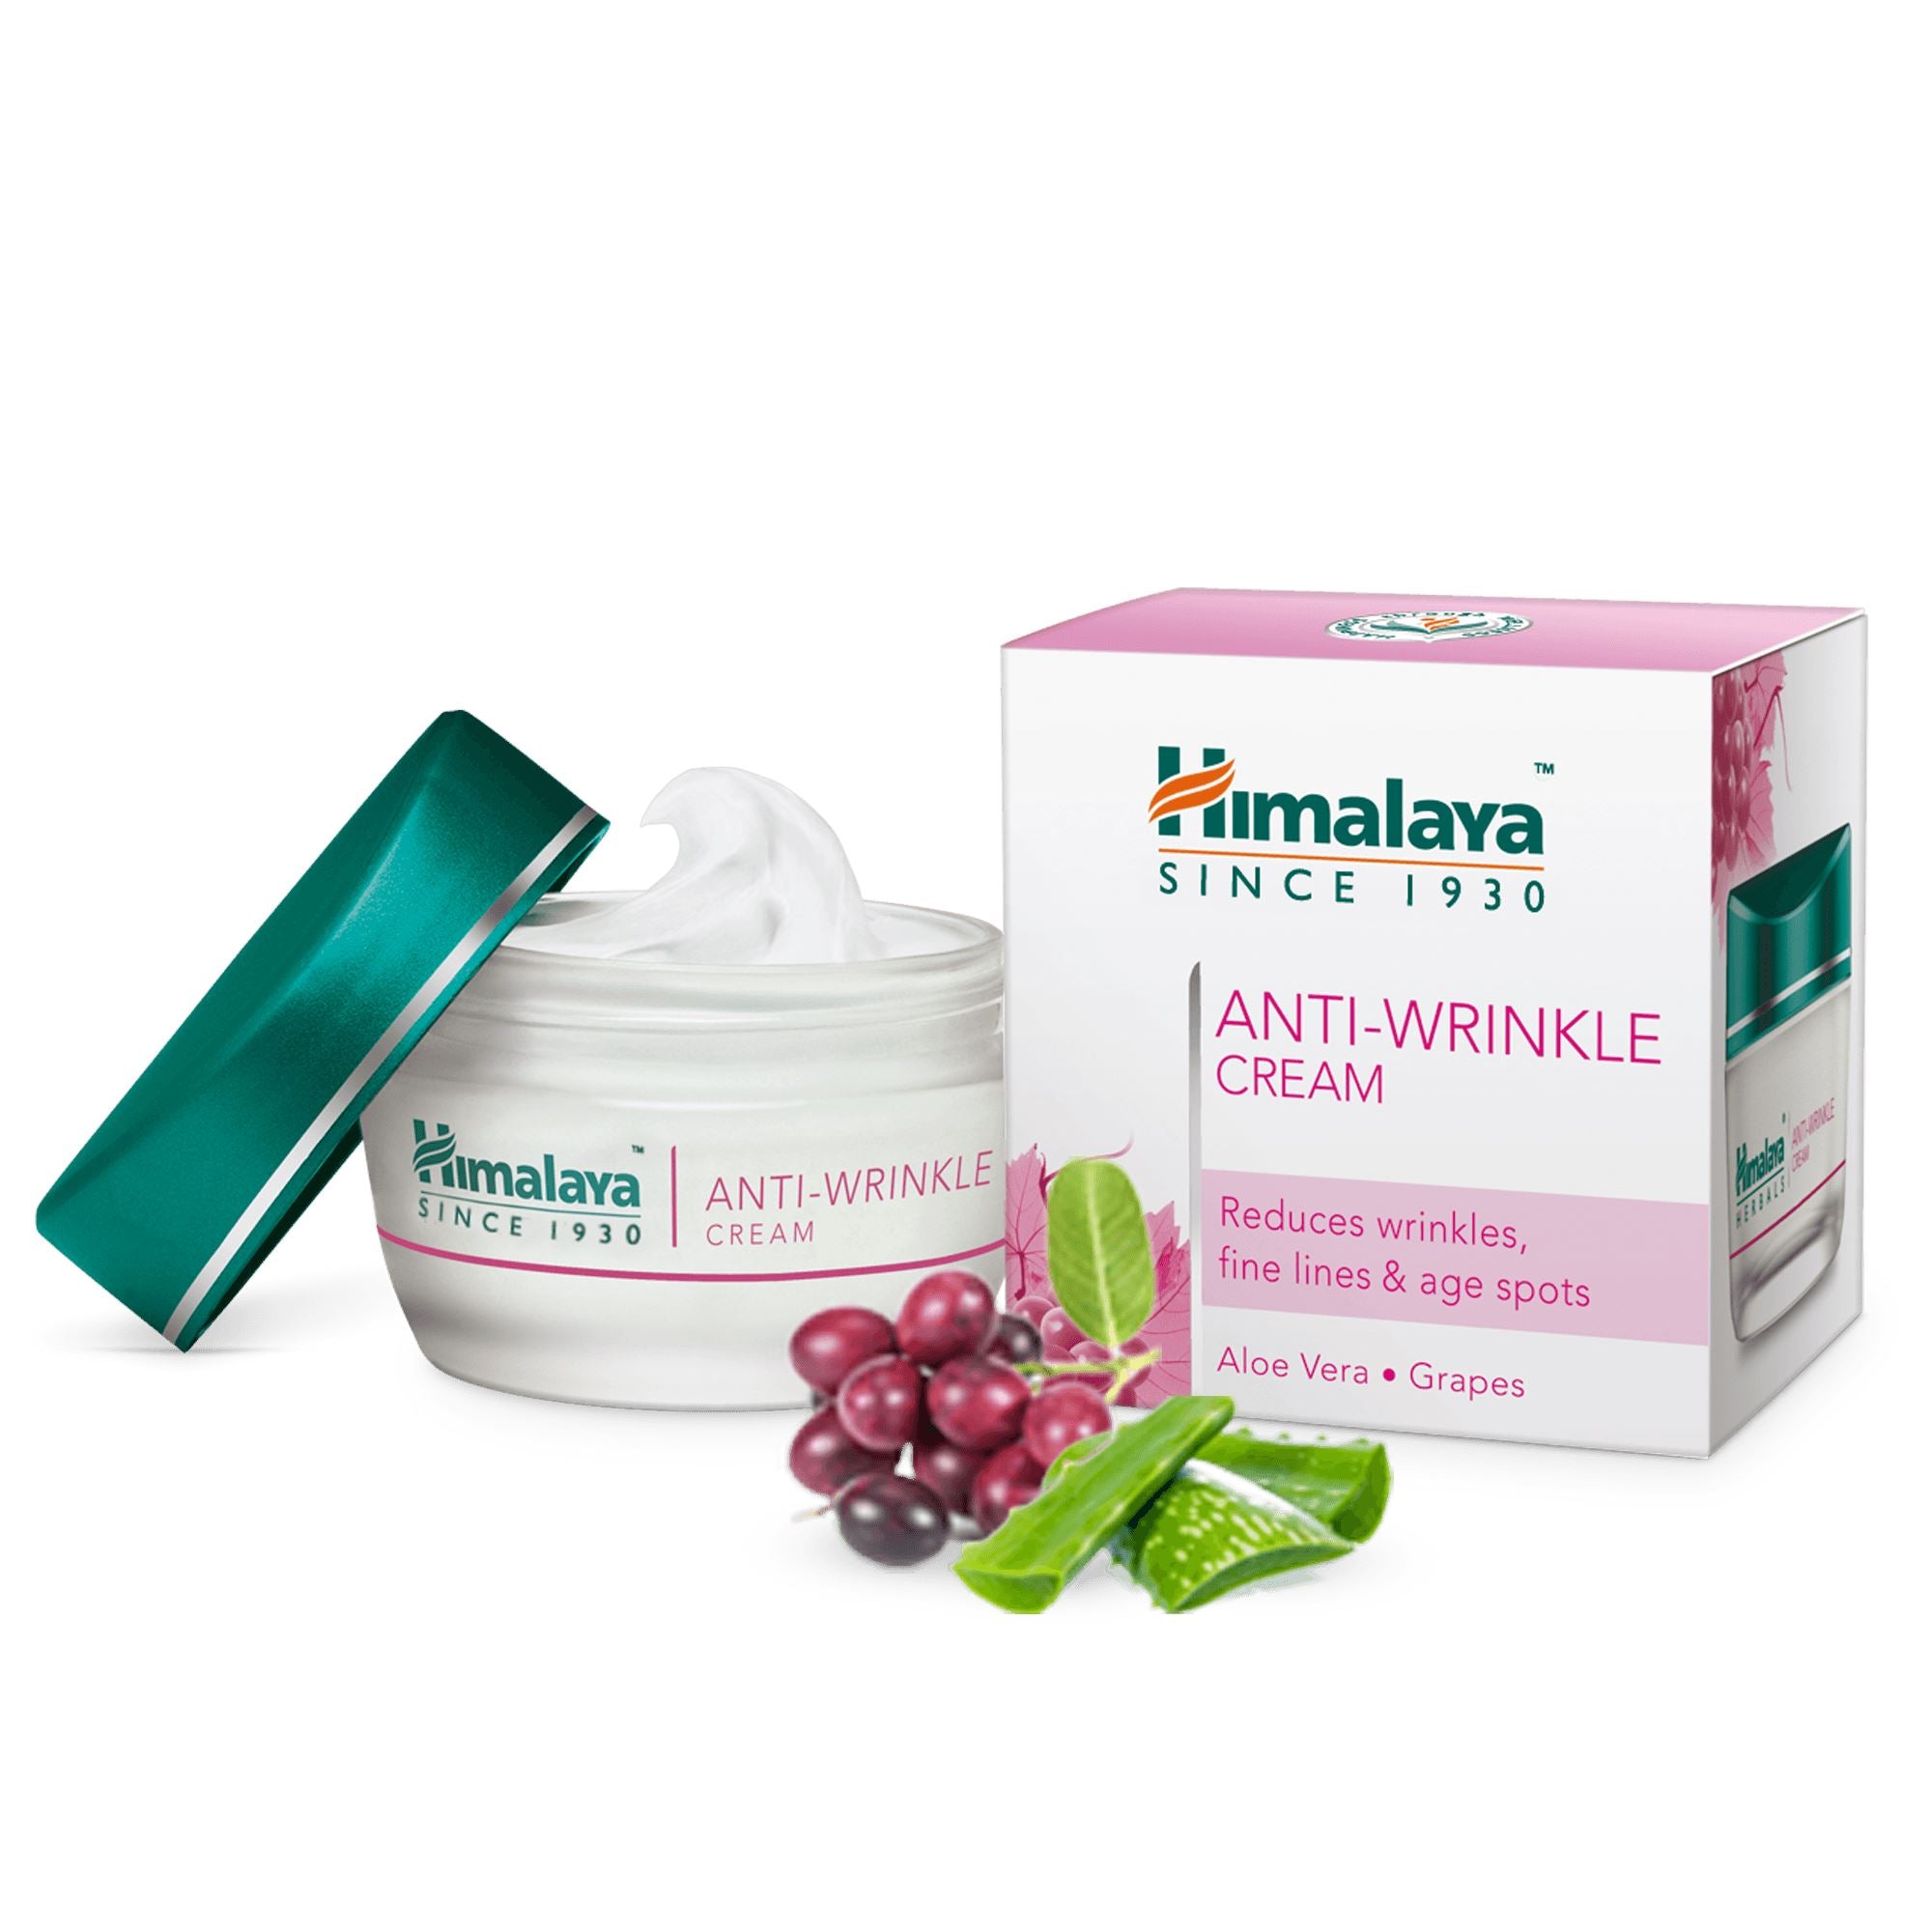 Himalaya Anti-Wrinkle Cream - Reduces wrinkles, fine lines and skin roughness